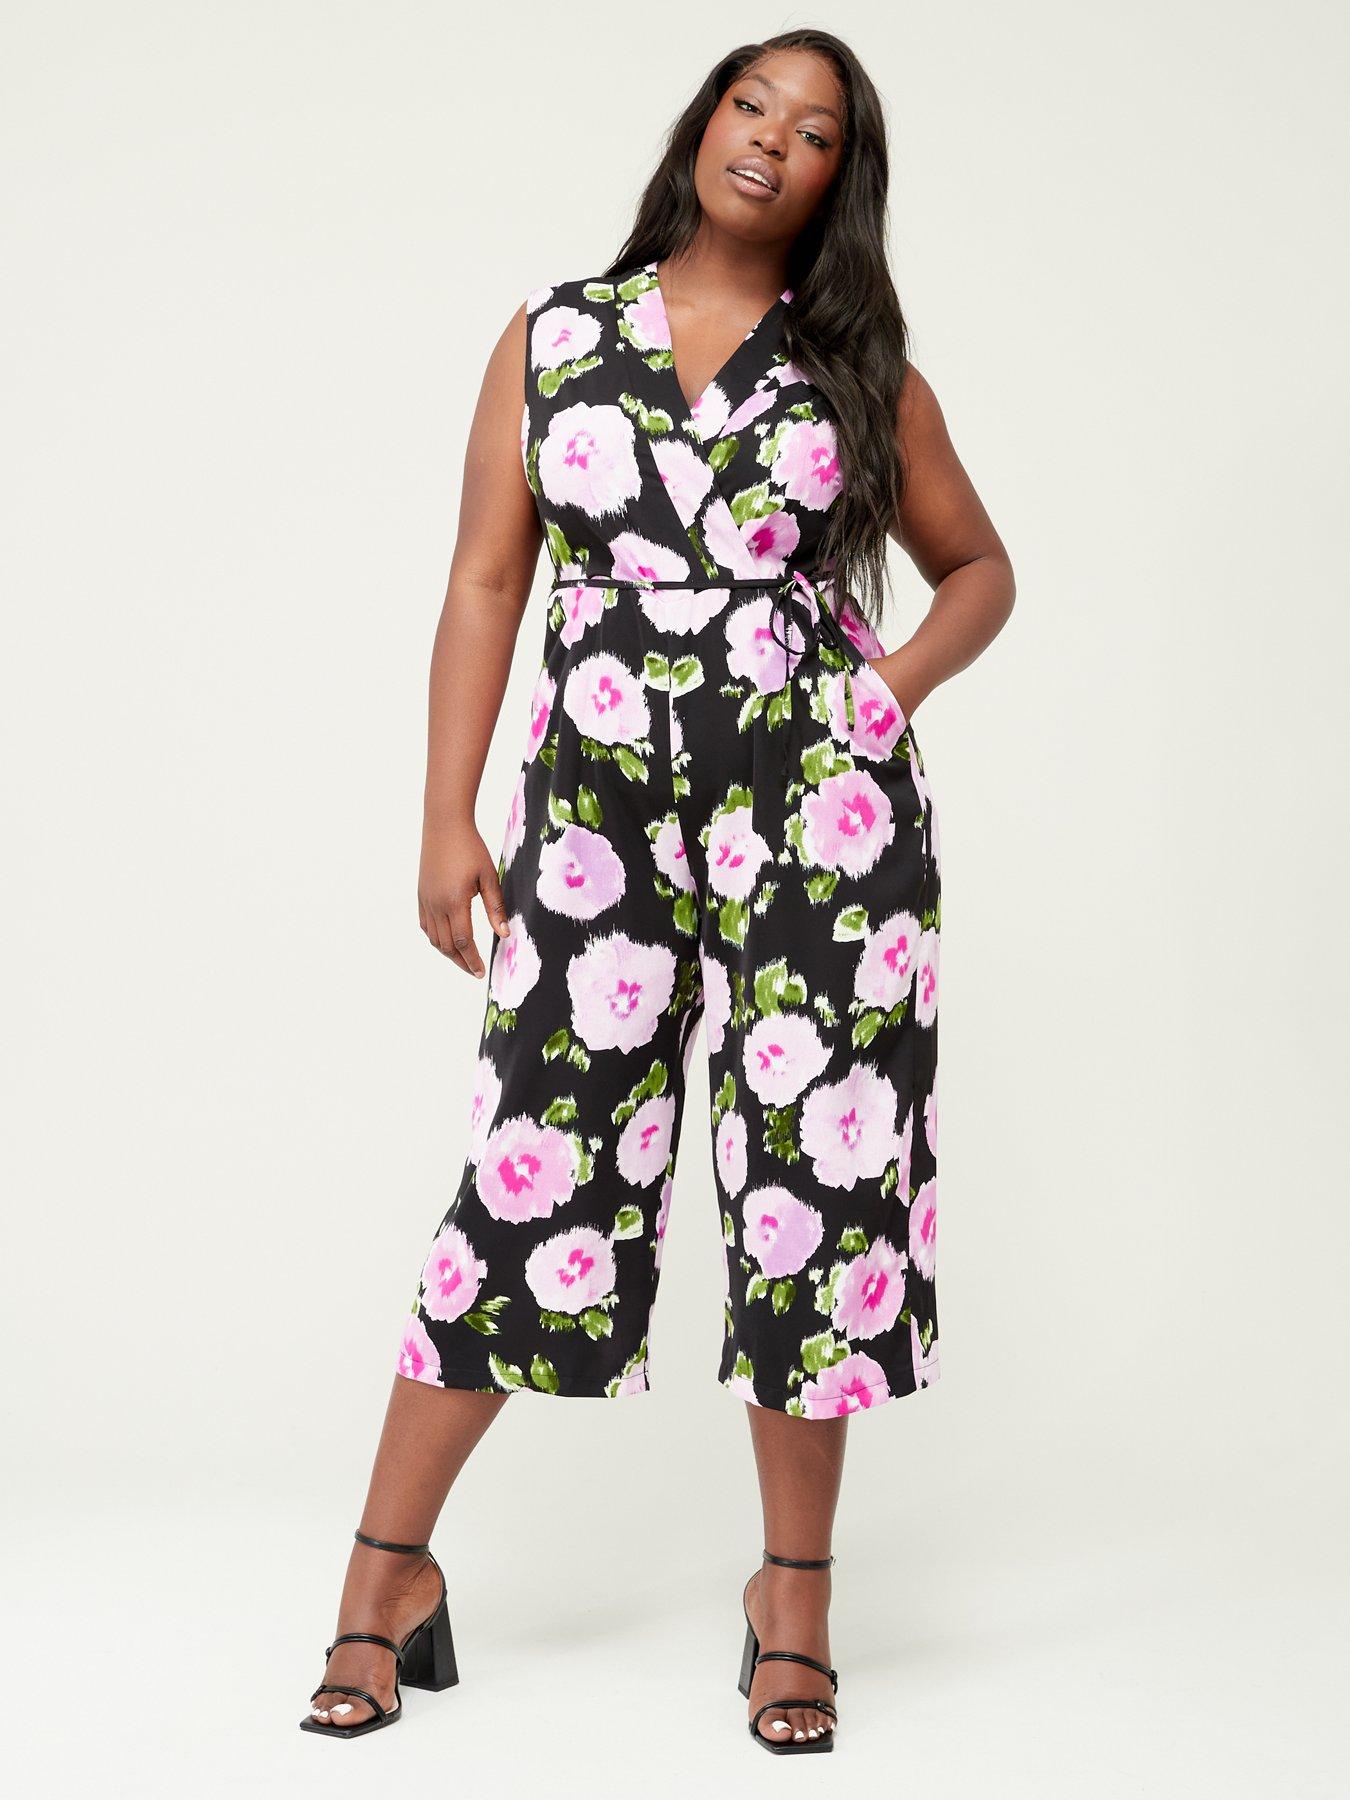 Black And Pink Floral Print Cut Out Day Dress – AX Paris